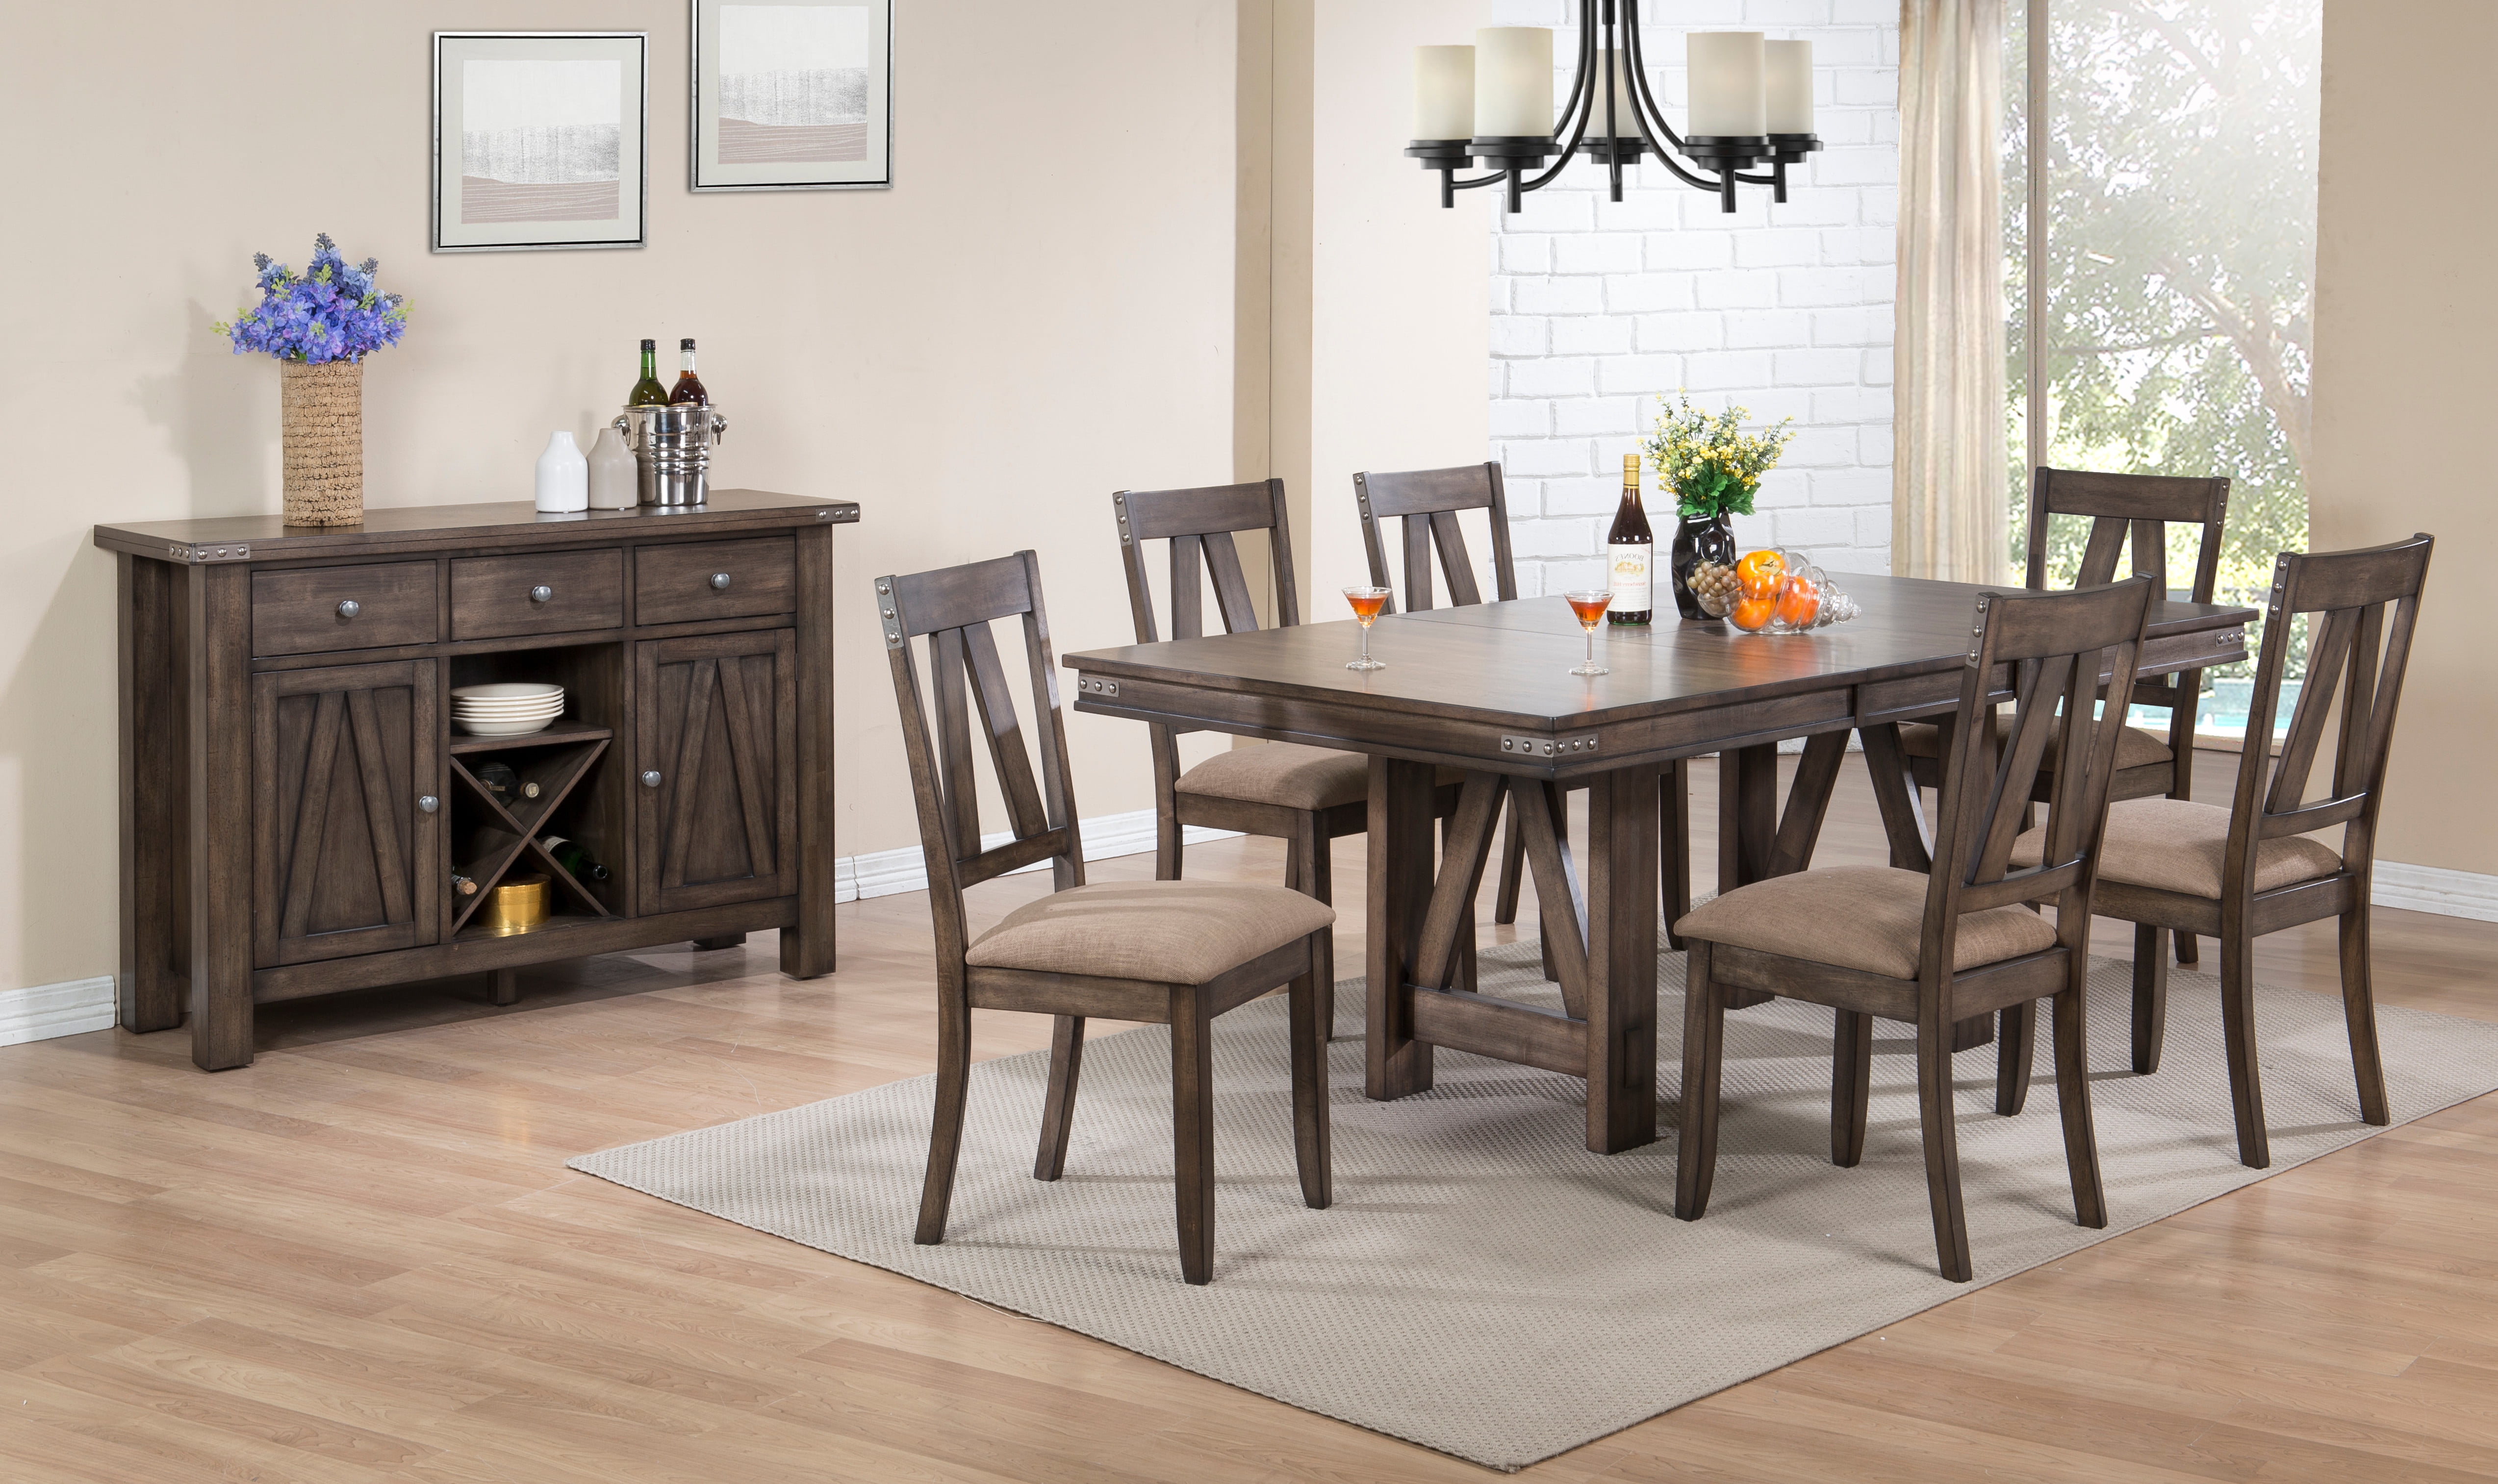 center table for dining room